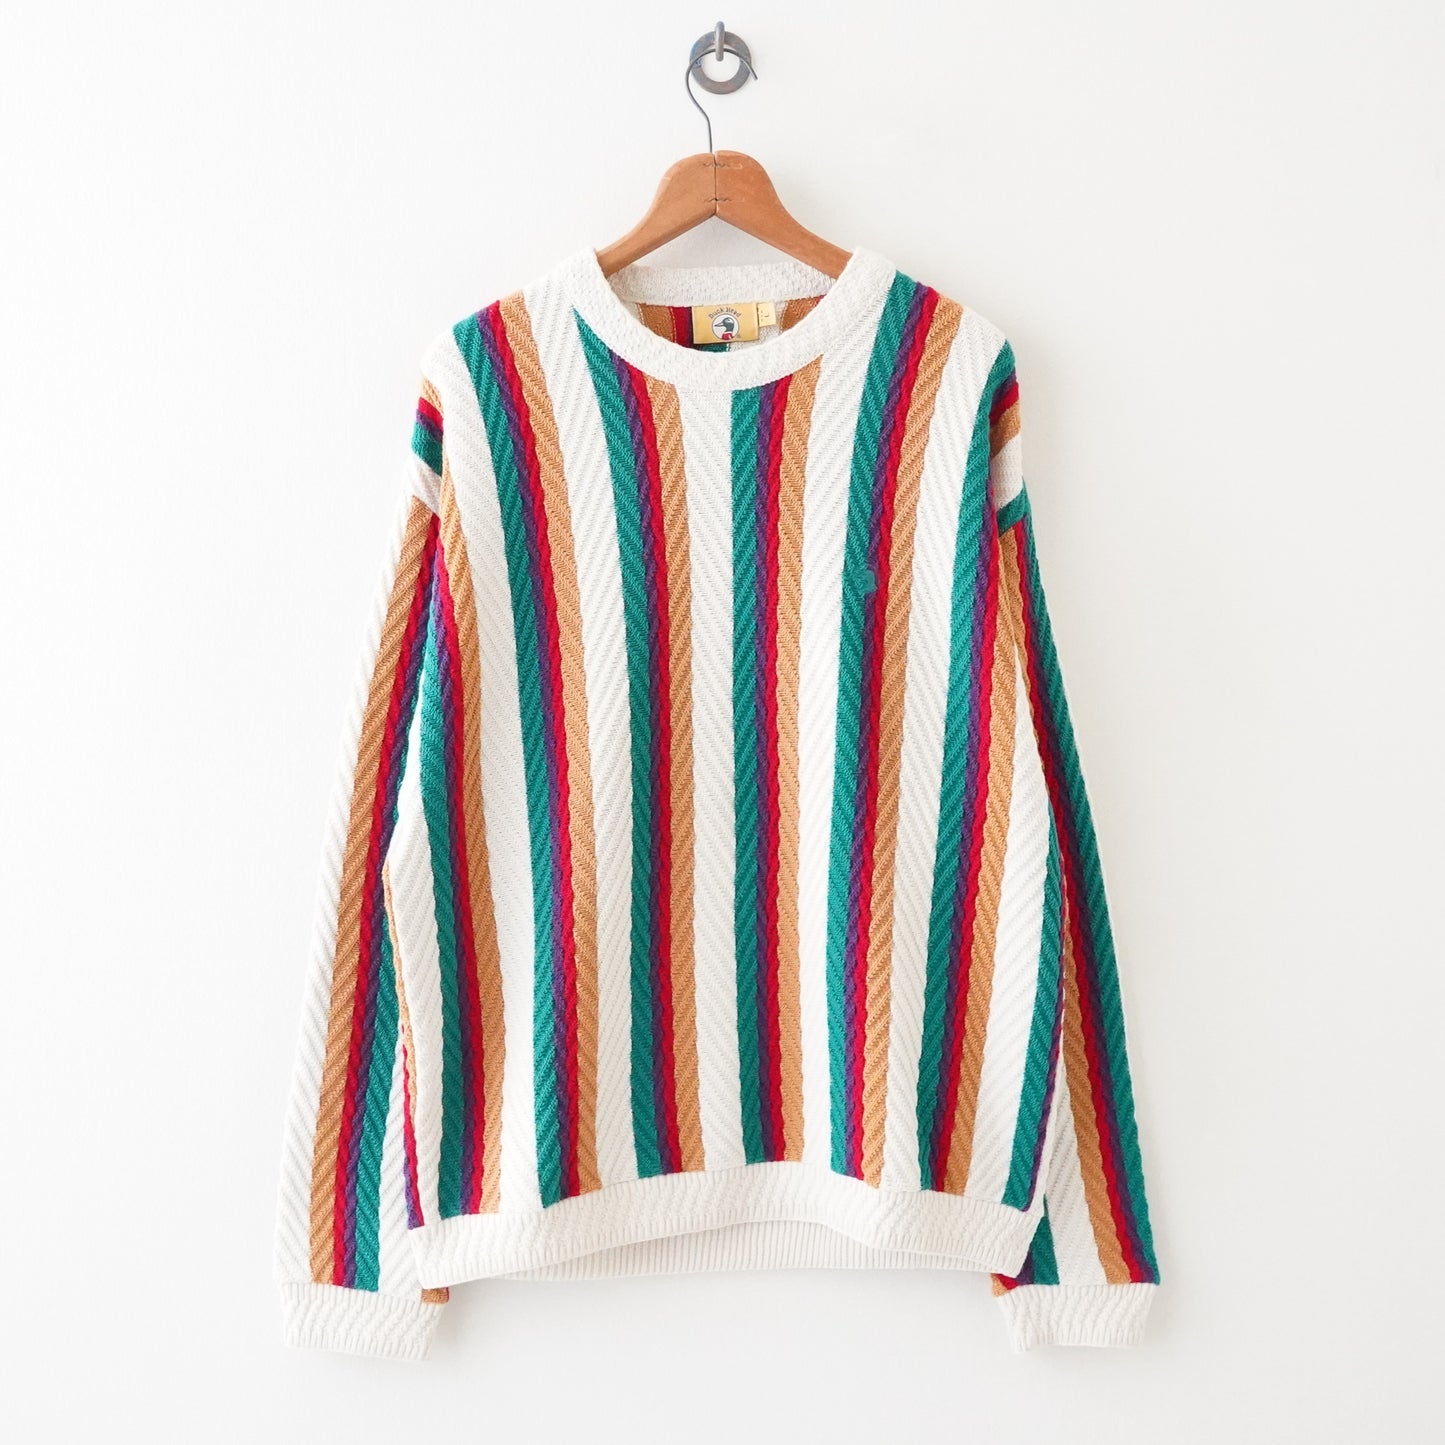 Colorful knit